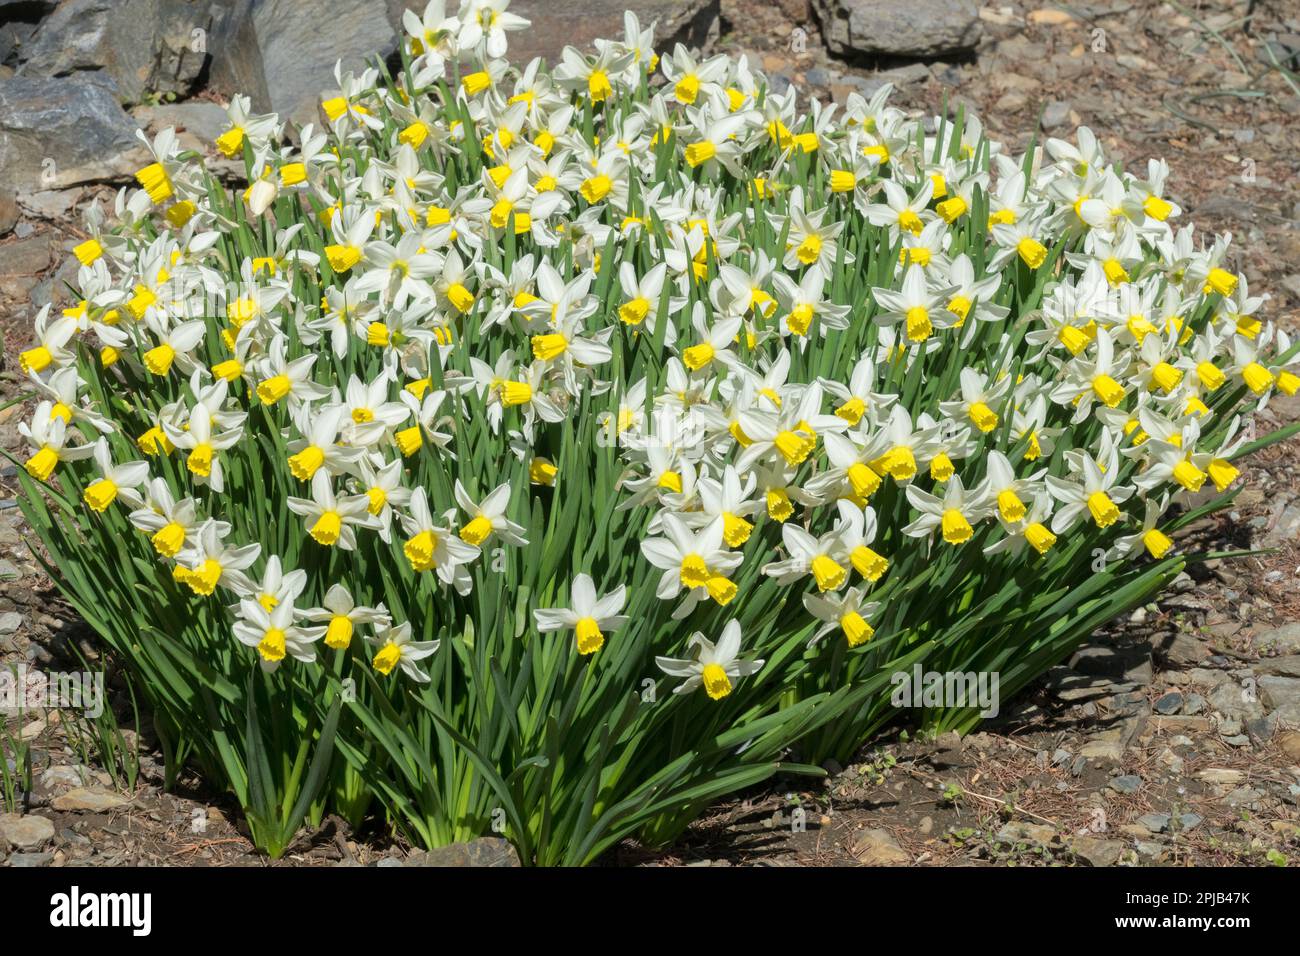 Clumps of Daffodils Narcissus, Group Blooming, Plants, White Yellow, Flowers Daffodil 'Golden Echo' Stock Photo